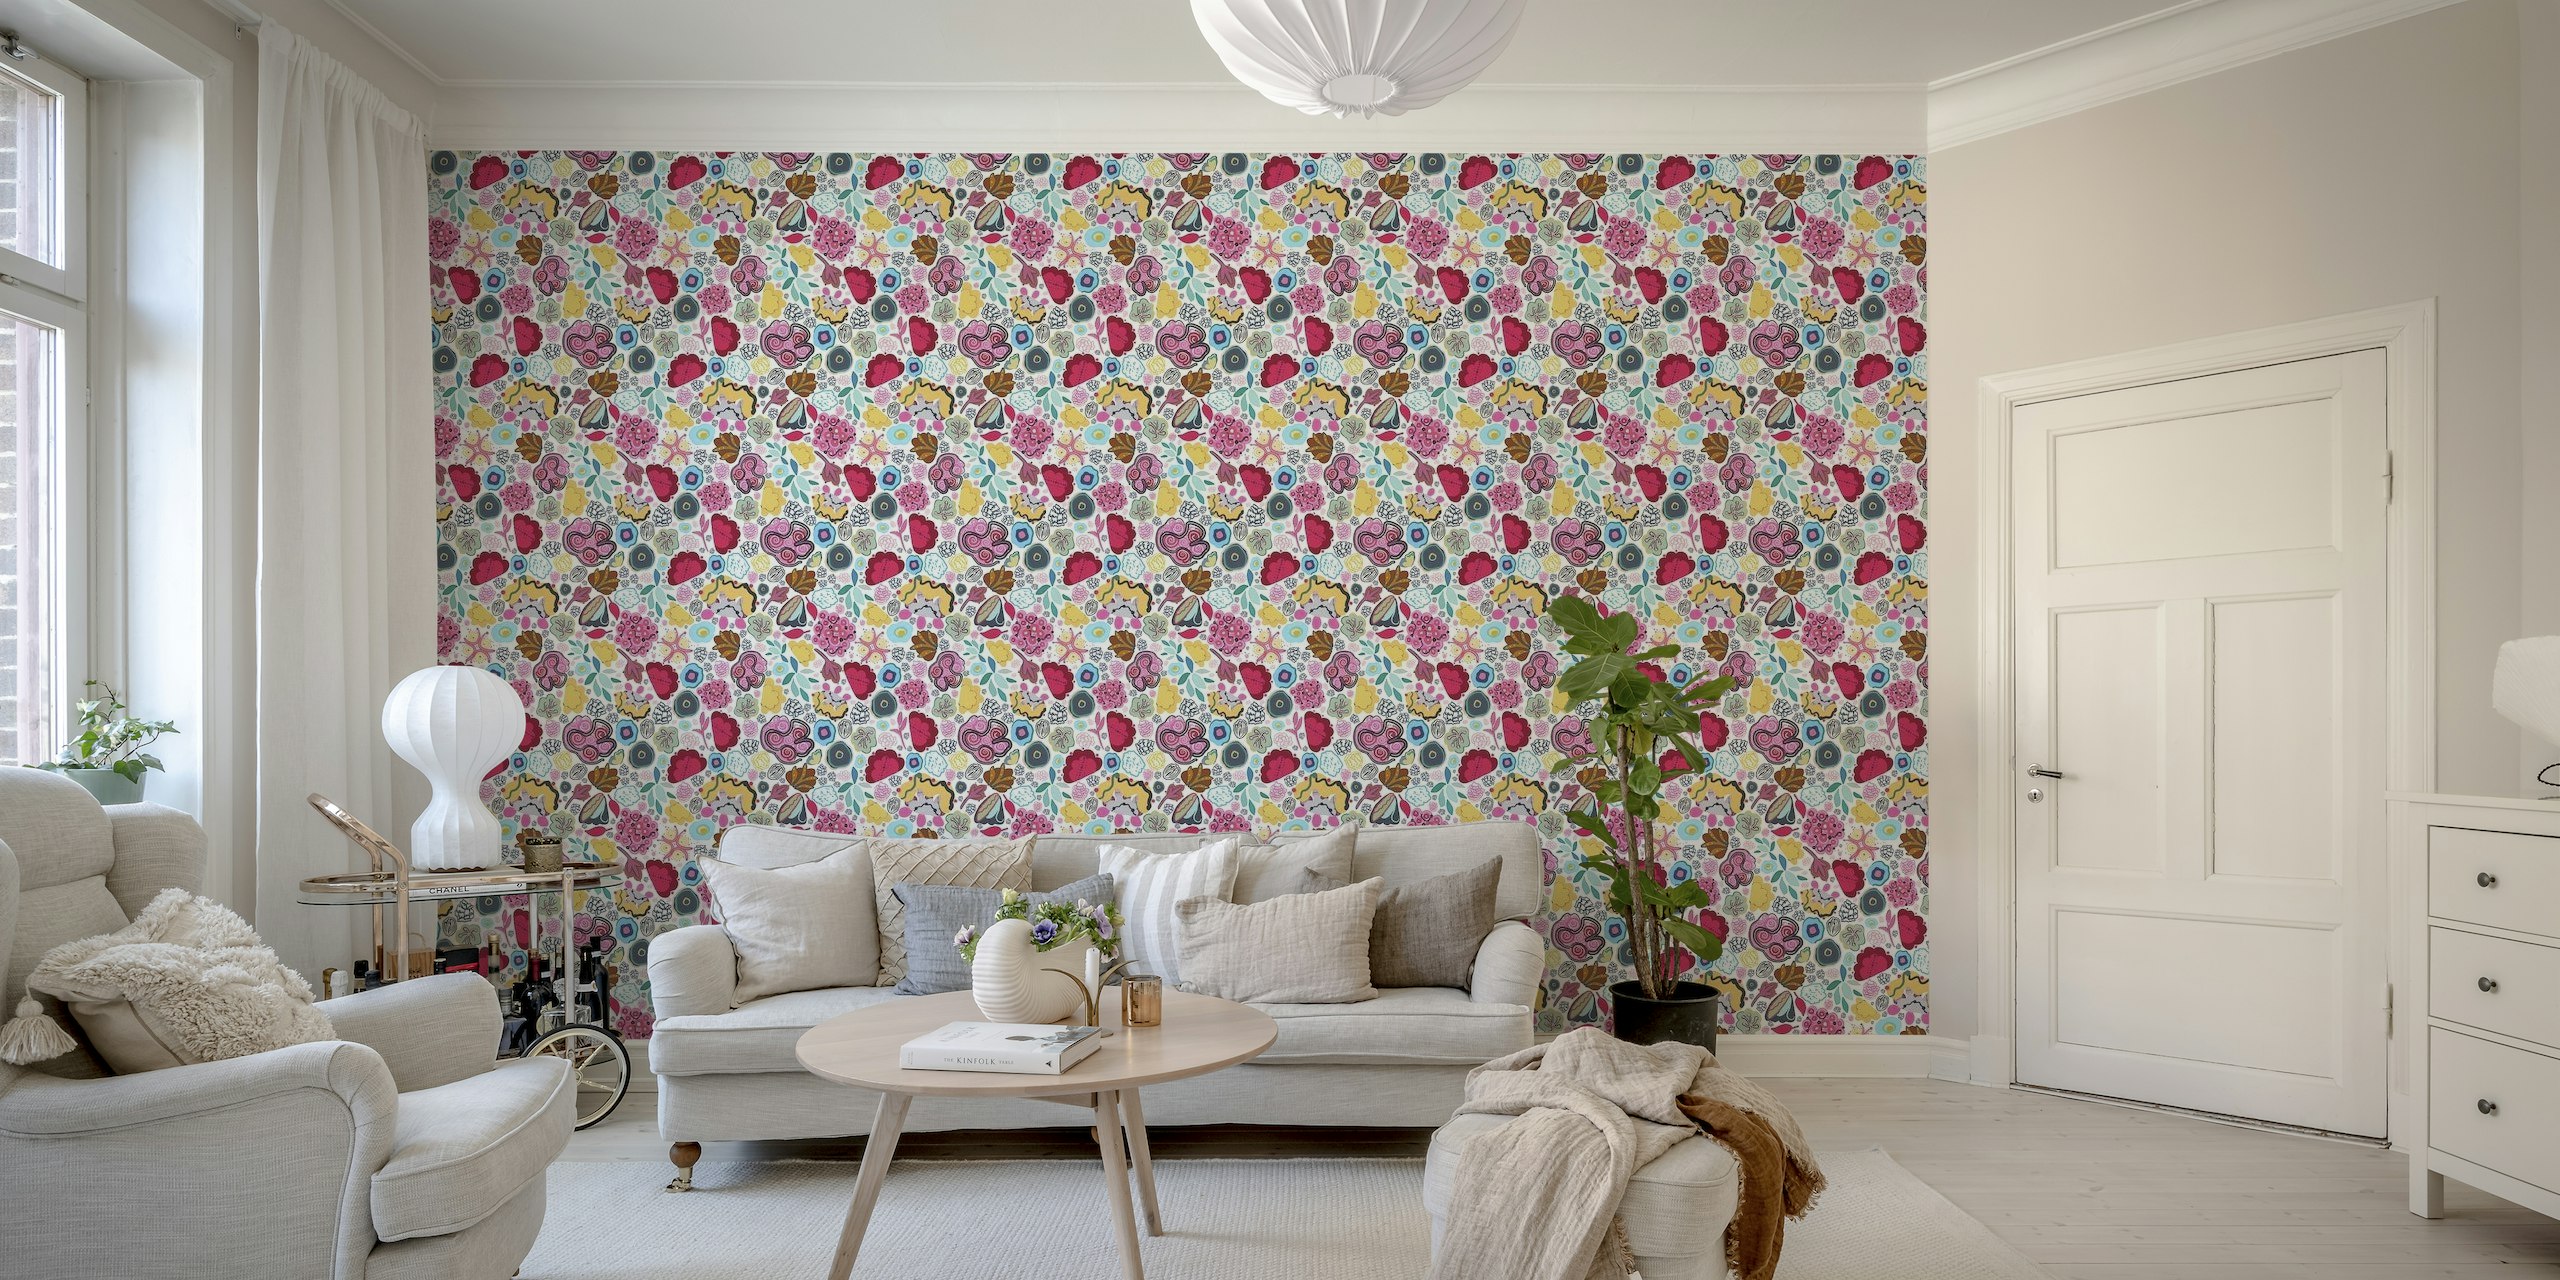 Colorful abstract floral wall mural with vibrant flowers and white background